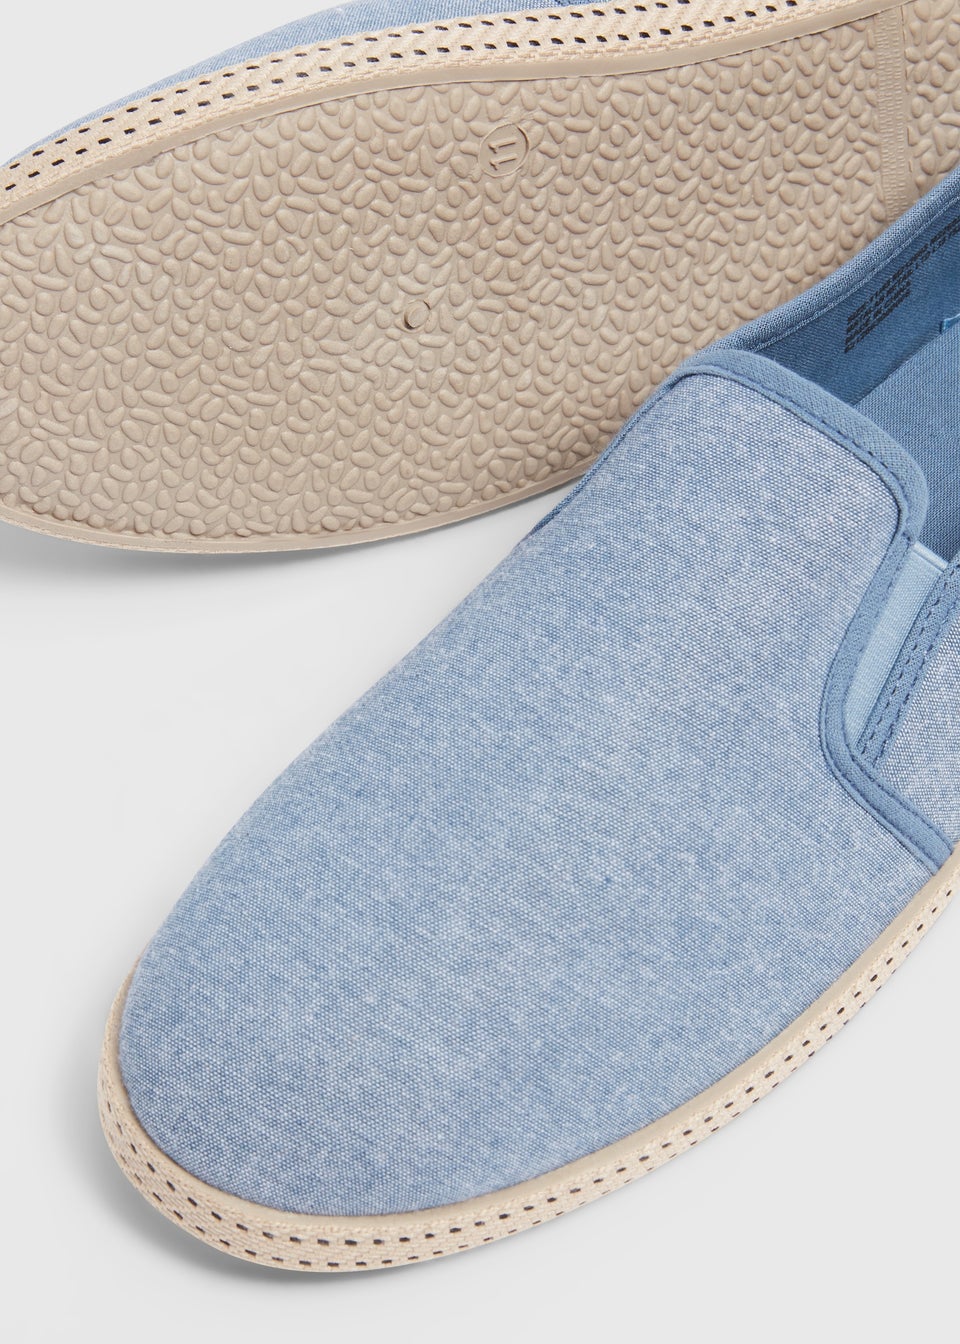 Blue Chambray Textured Espadrille